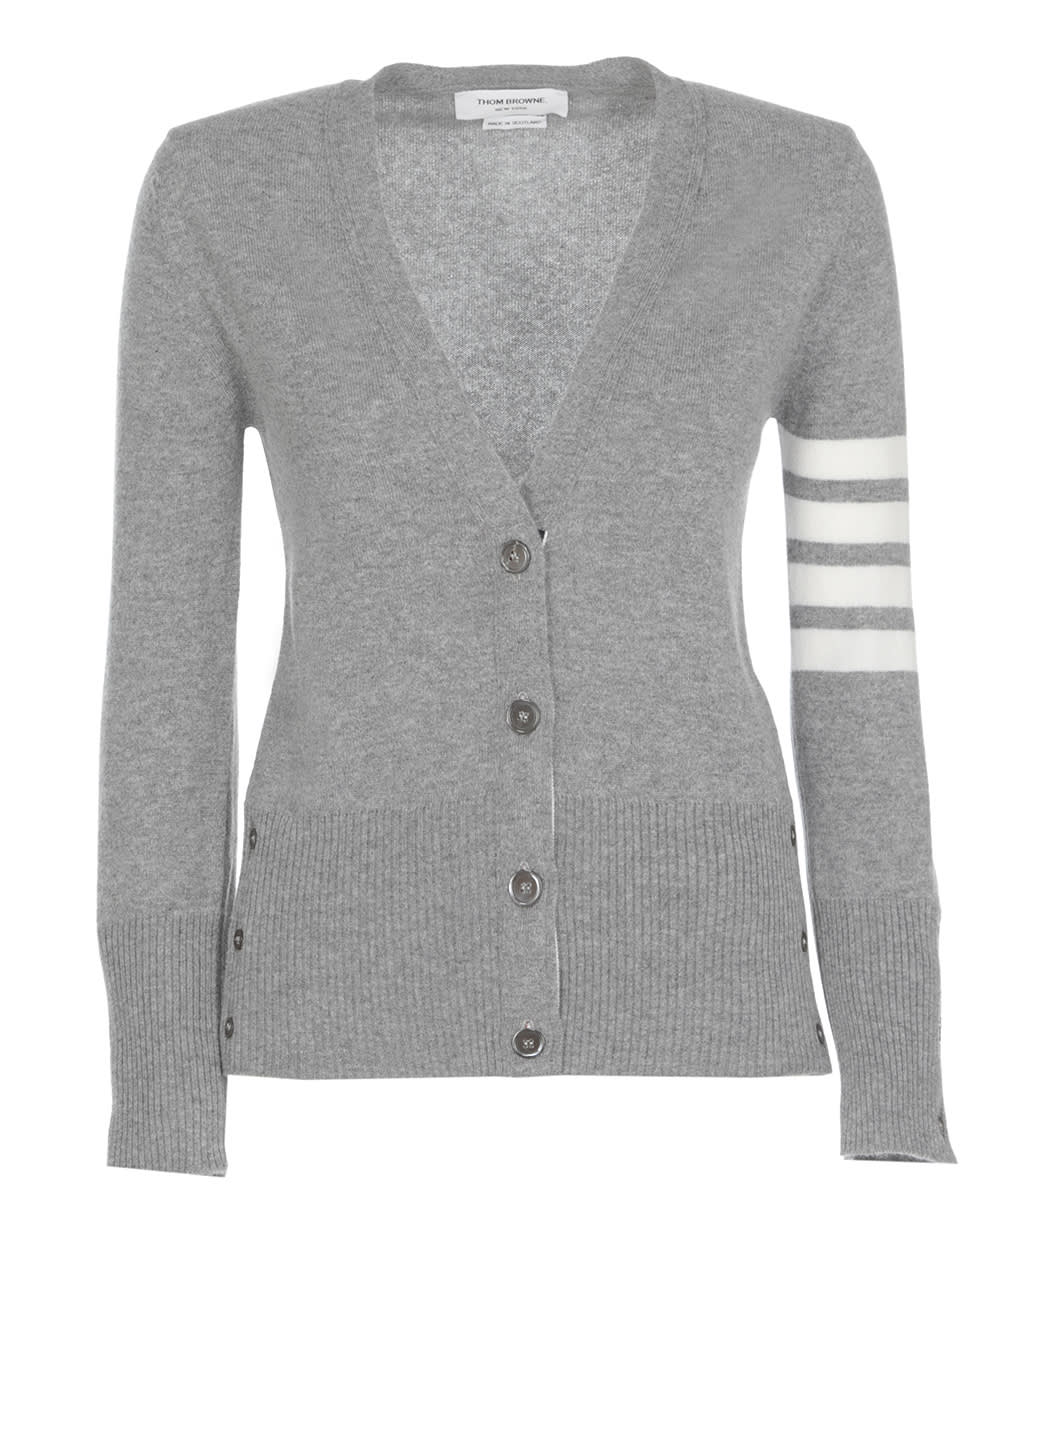 Thom Browne Cashmere Knitted Cardigan